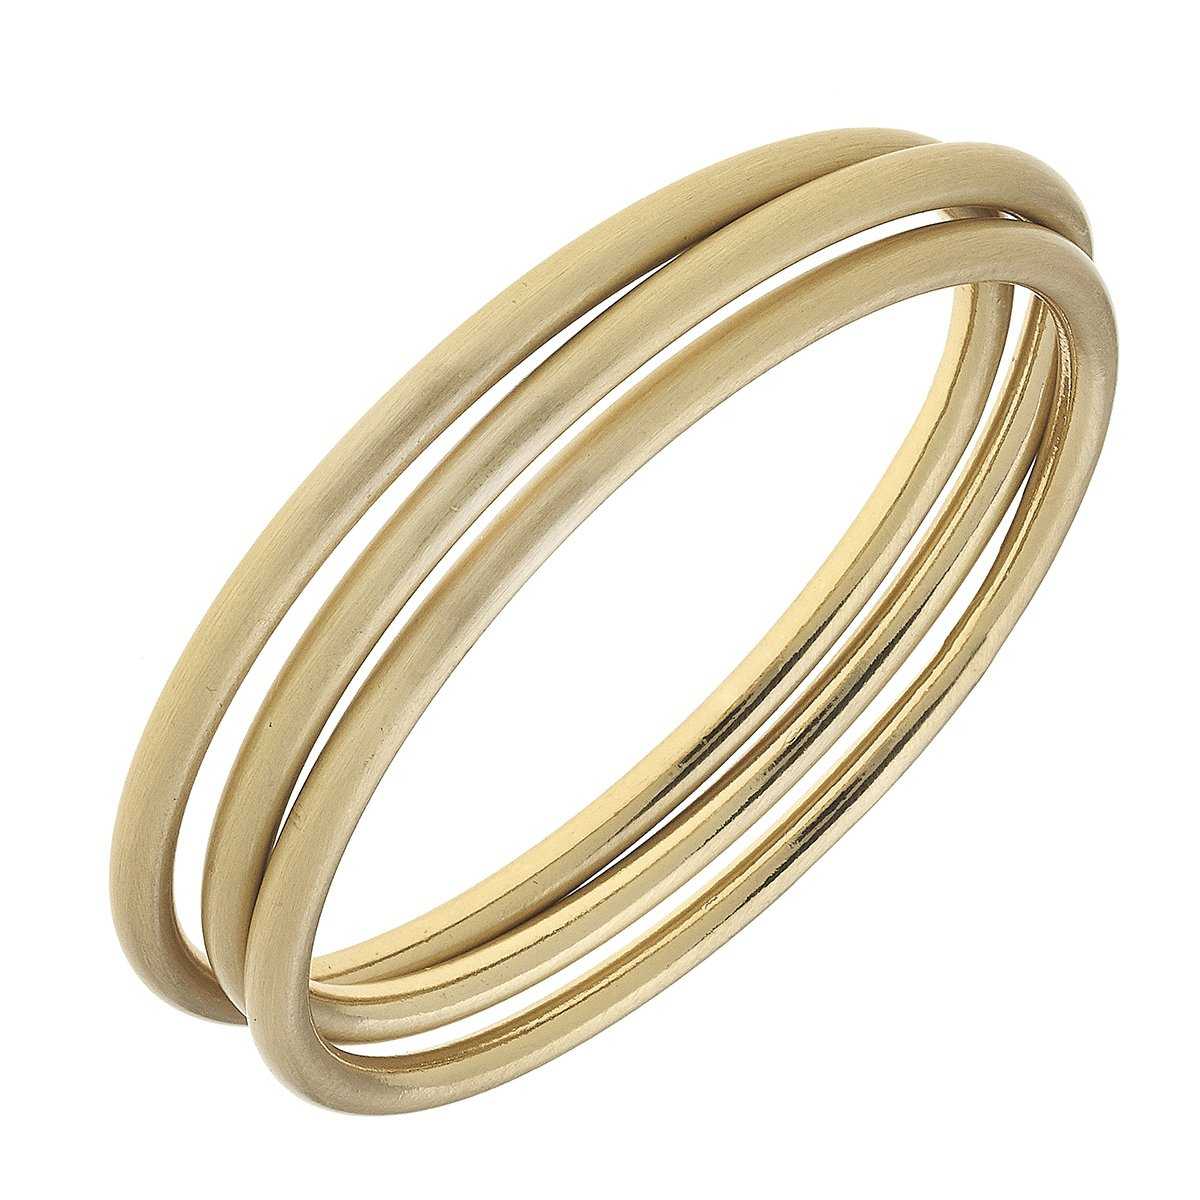 CANVAS Style - Isla Bangles in Satin Gold - Set of 3